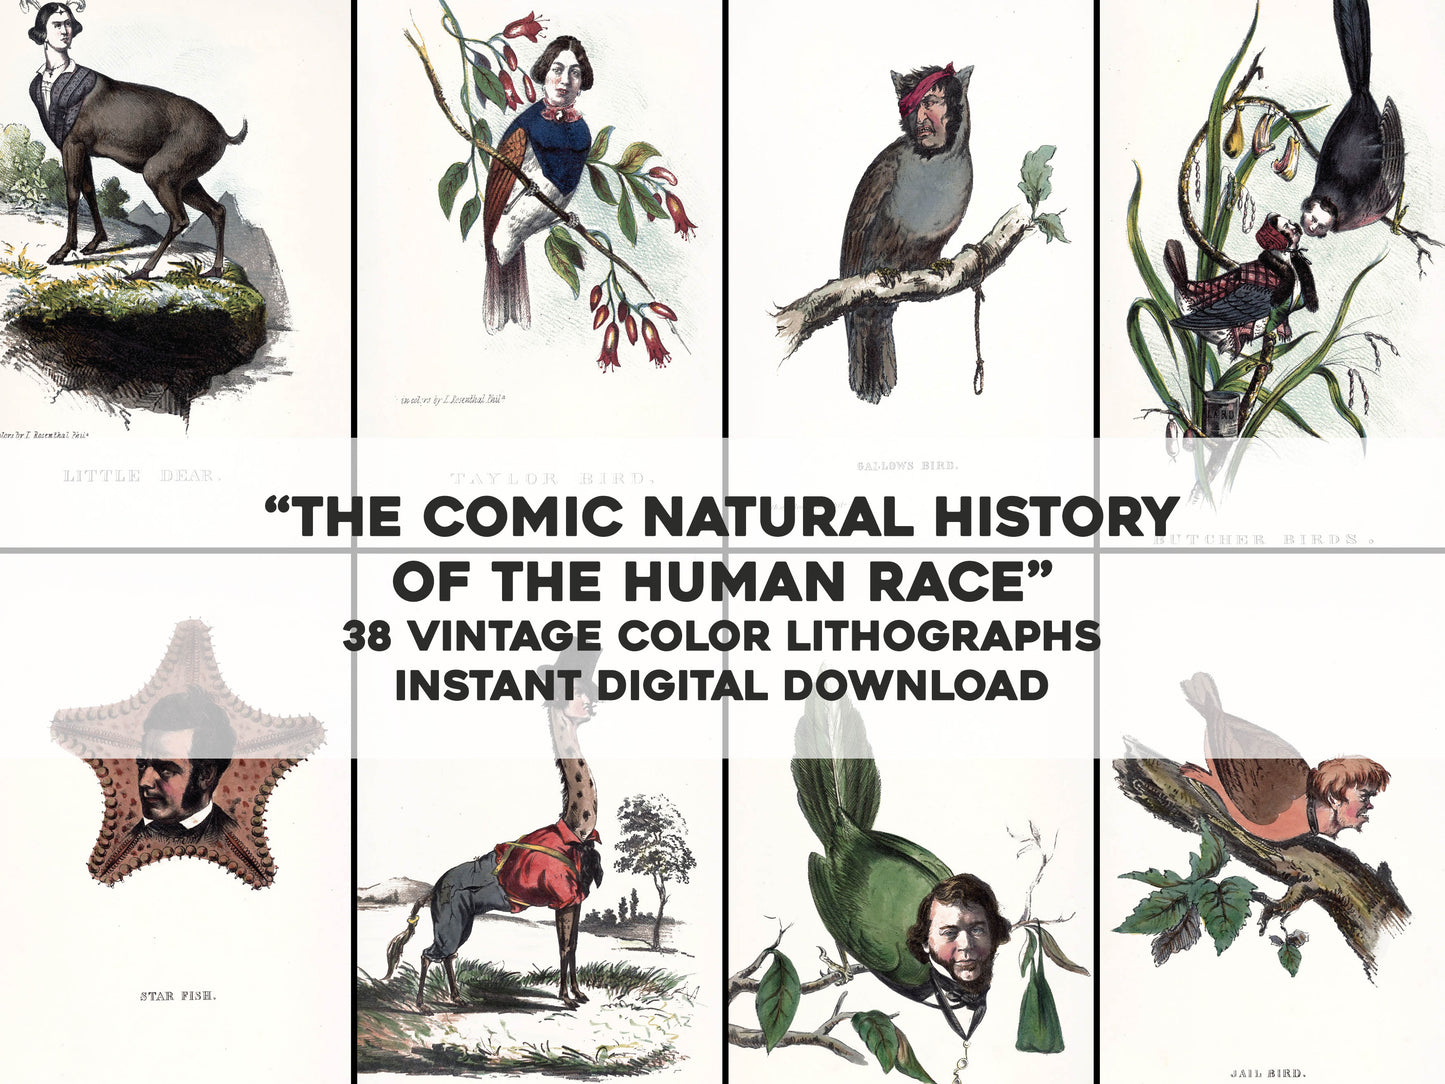 The Comic Natural History [38 Images]